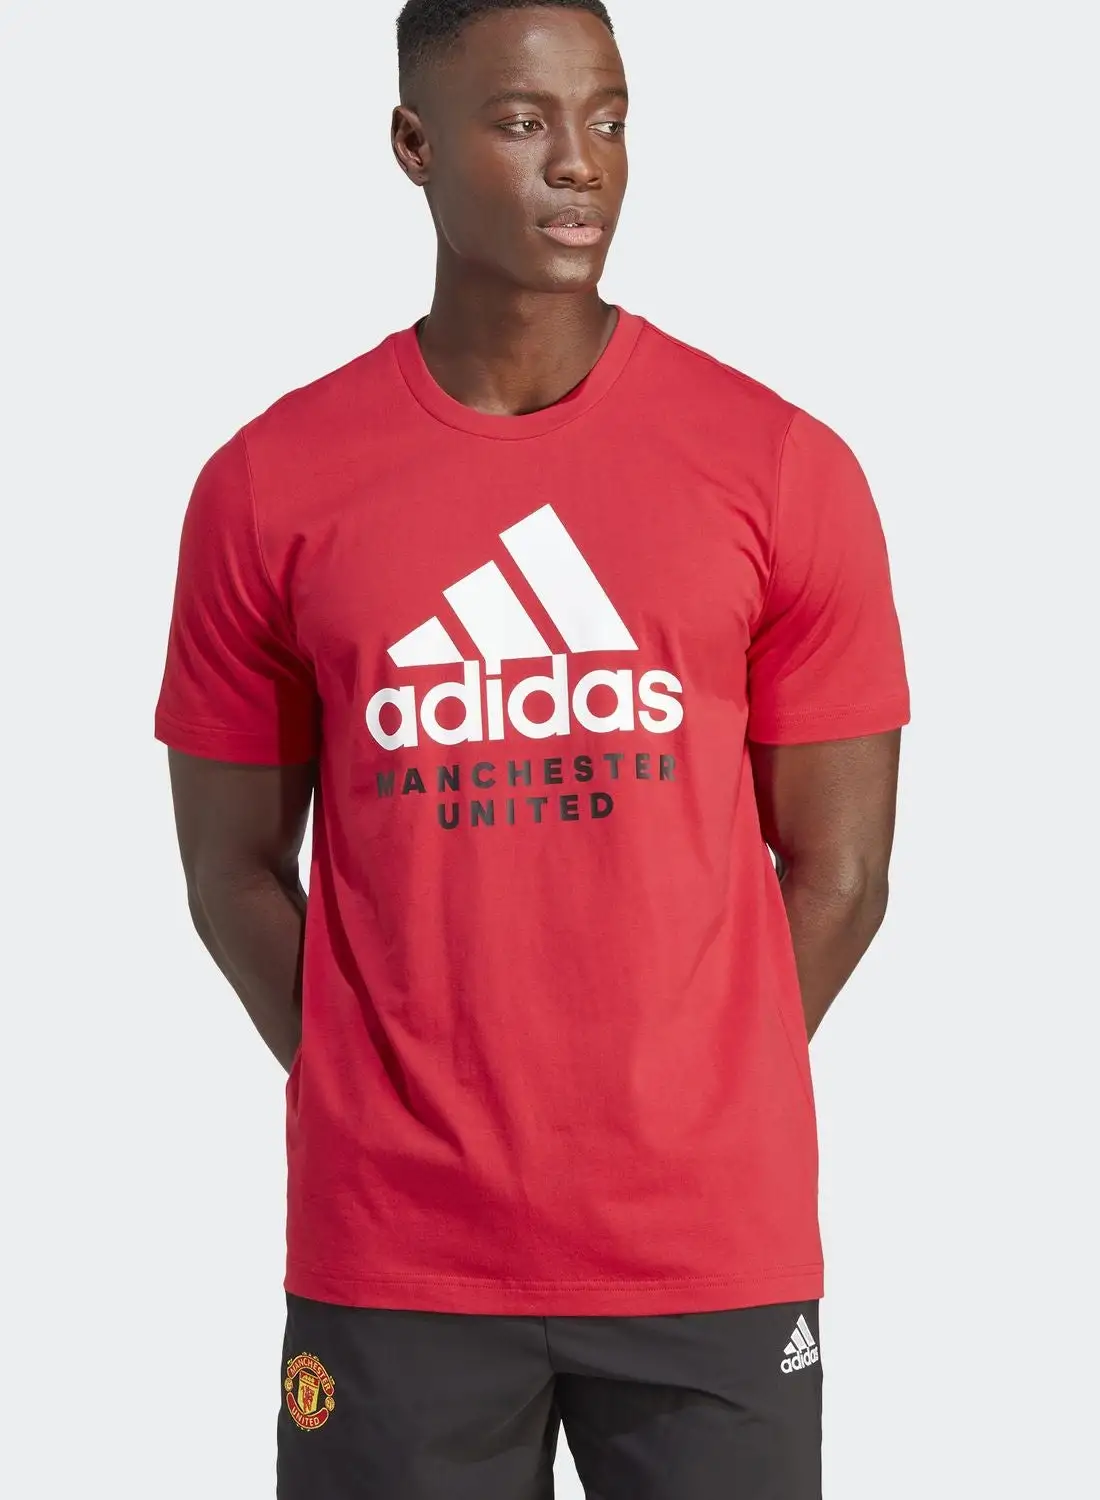 Adidas Manchester United Dna Graphic T-Shirt